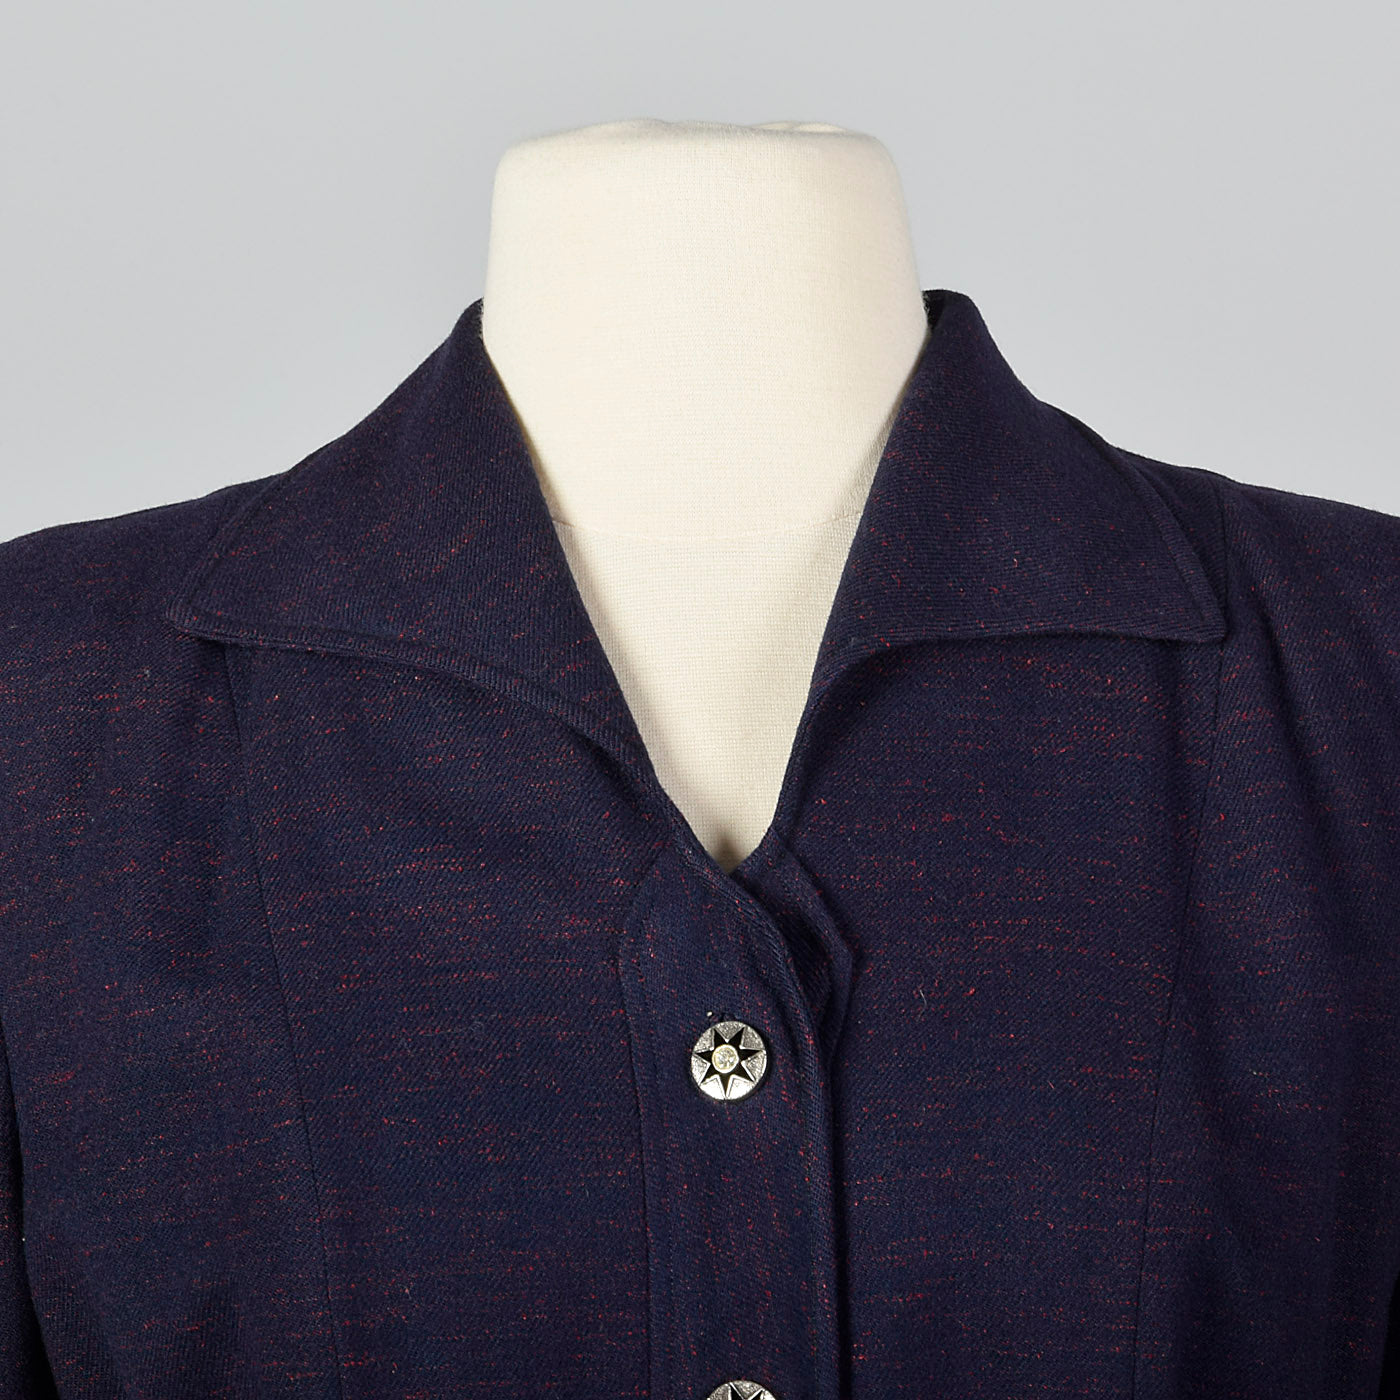 1950s Navy Blue Skirt Suit with Decorative Buttons